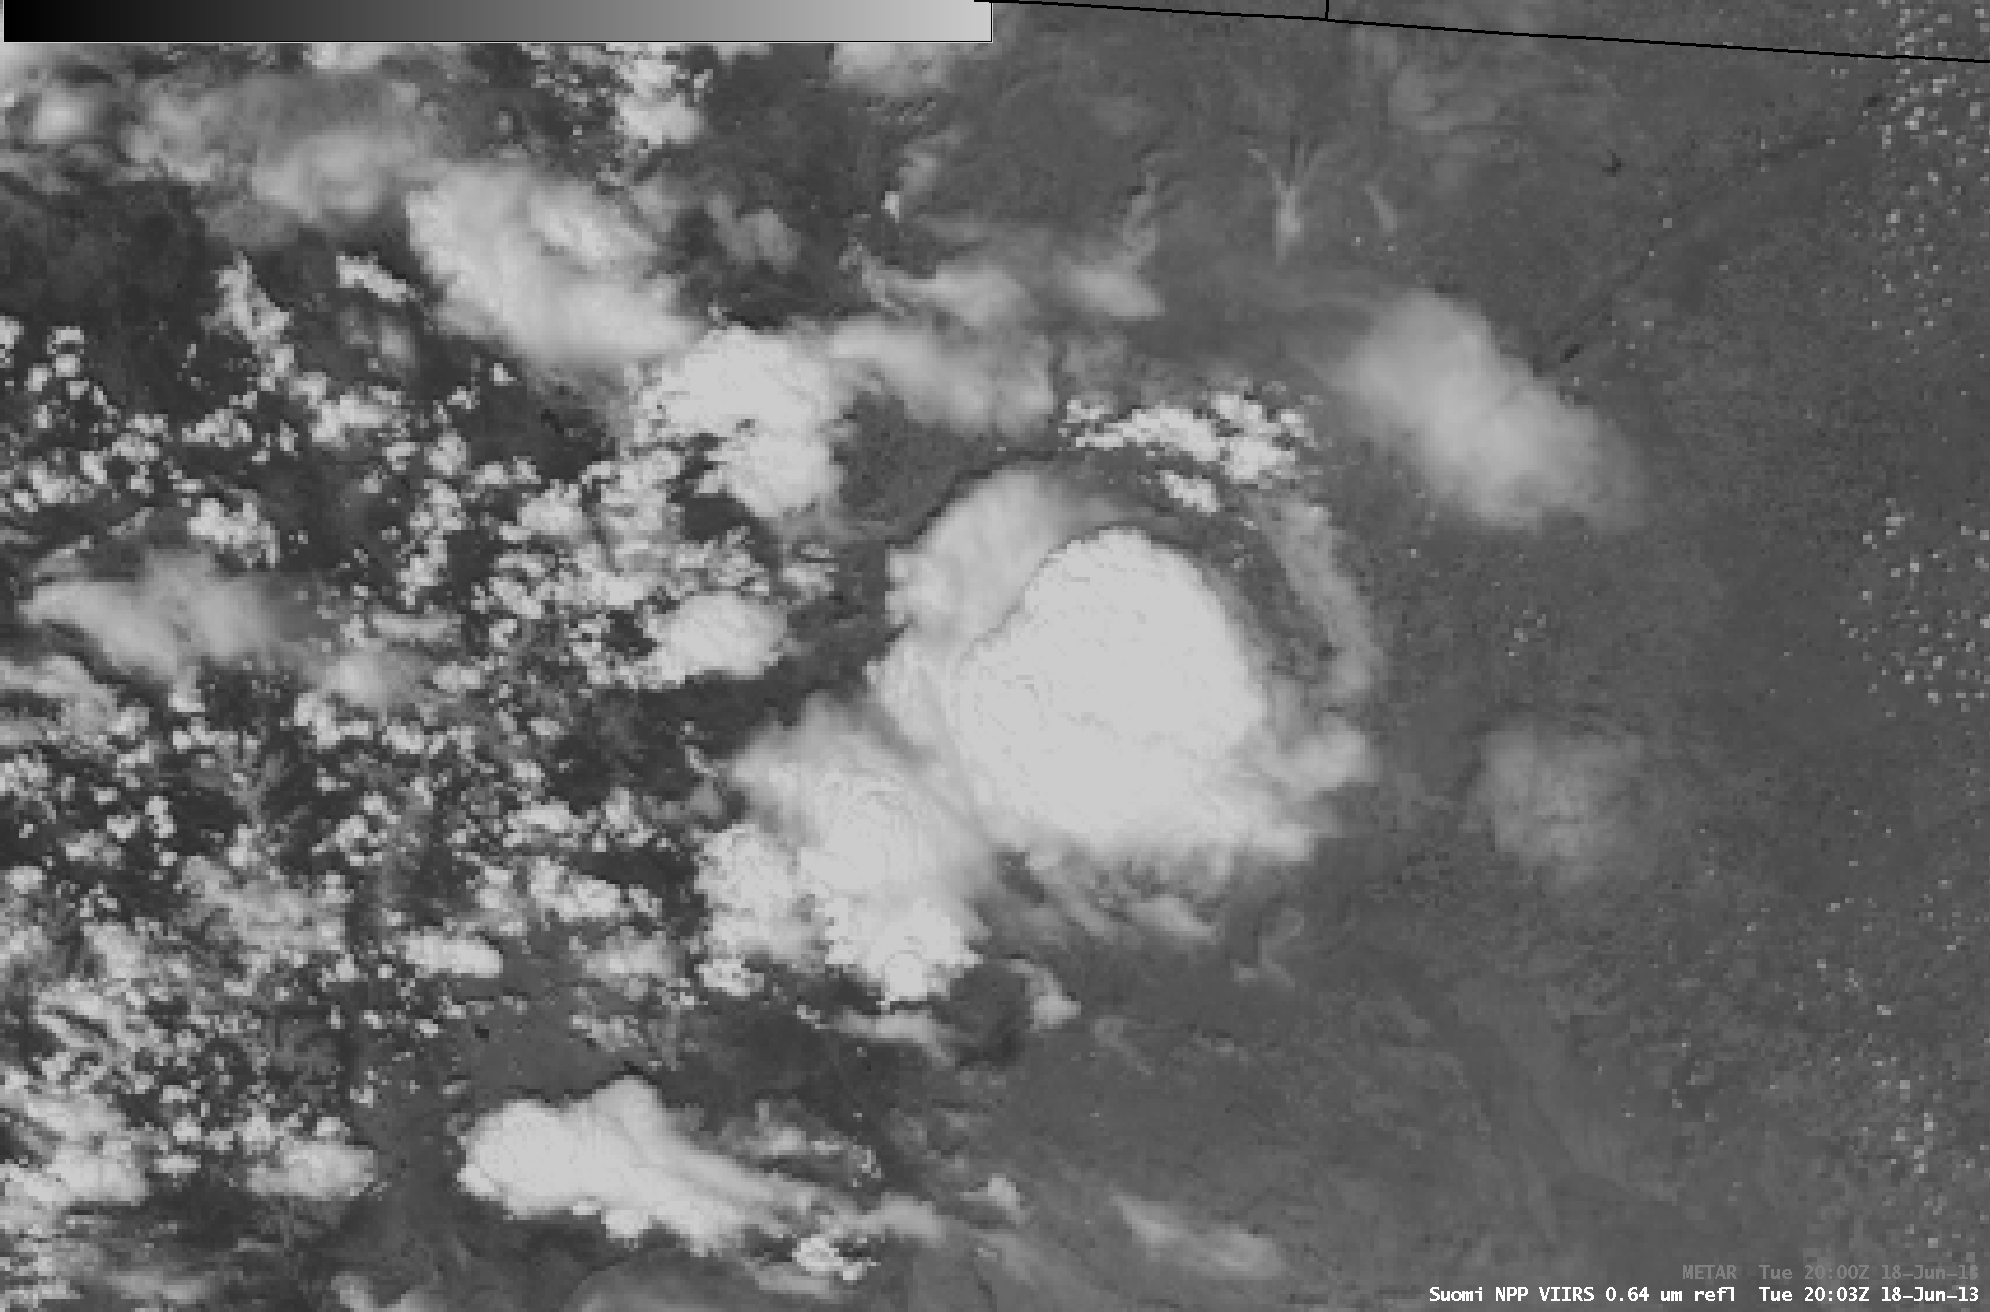 Suomi NPP VIIRS 0.64 um visible image and 11.45 um IR channel image (with overlay of METAR surface reports)